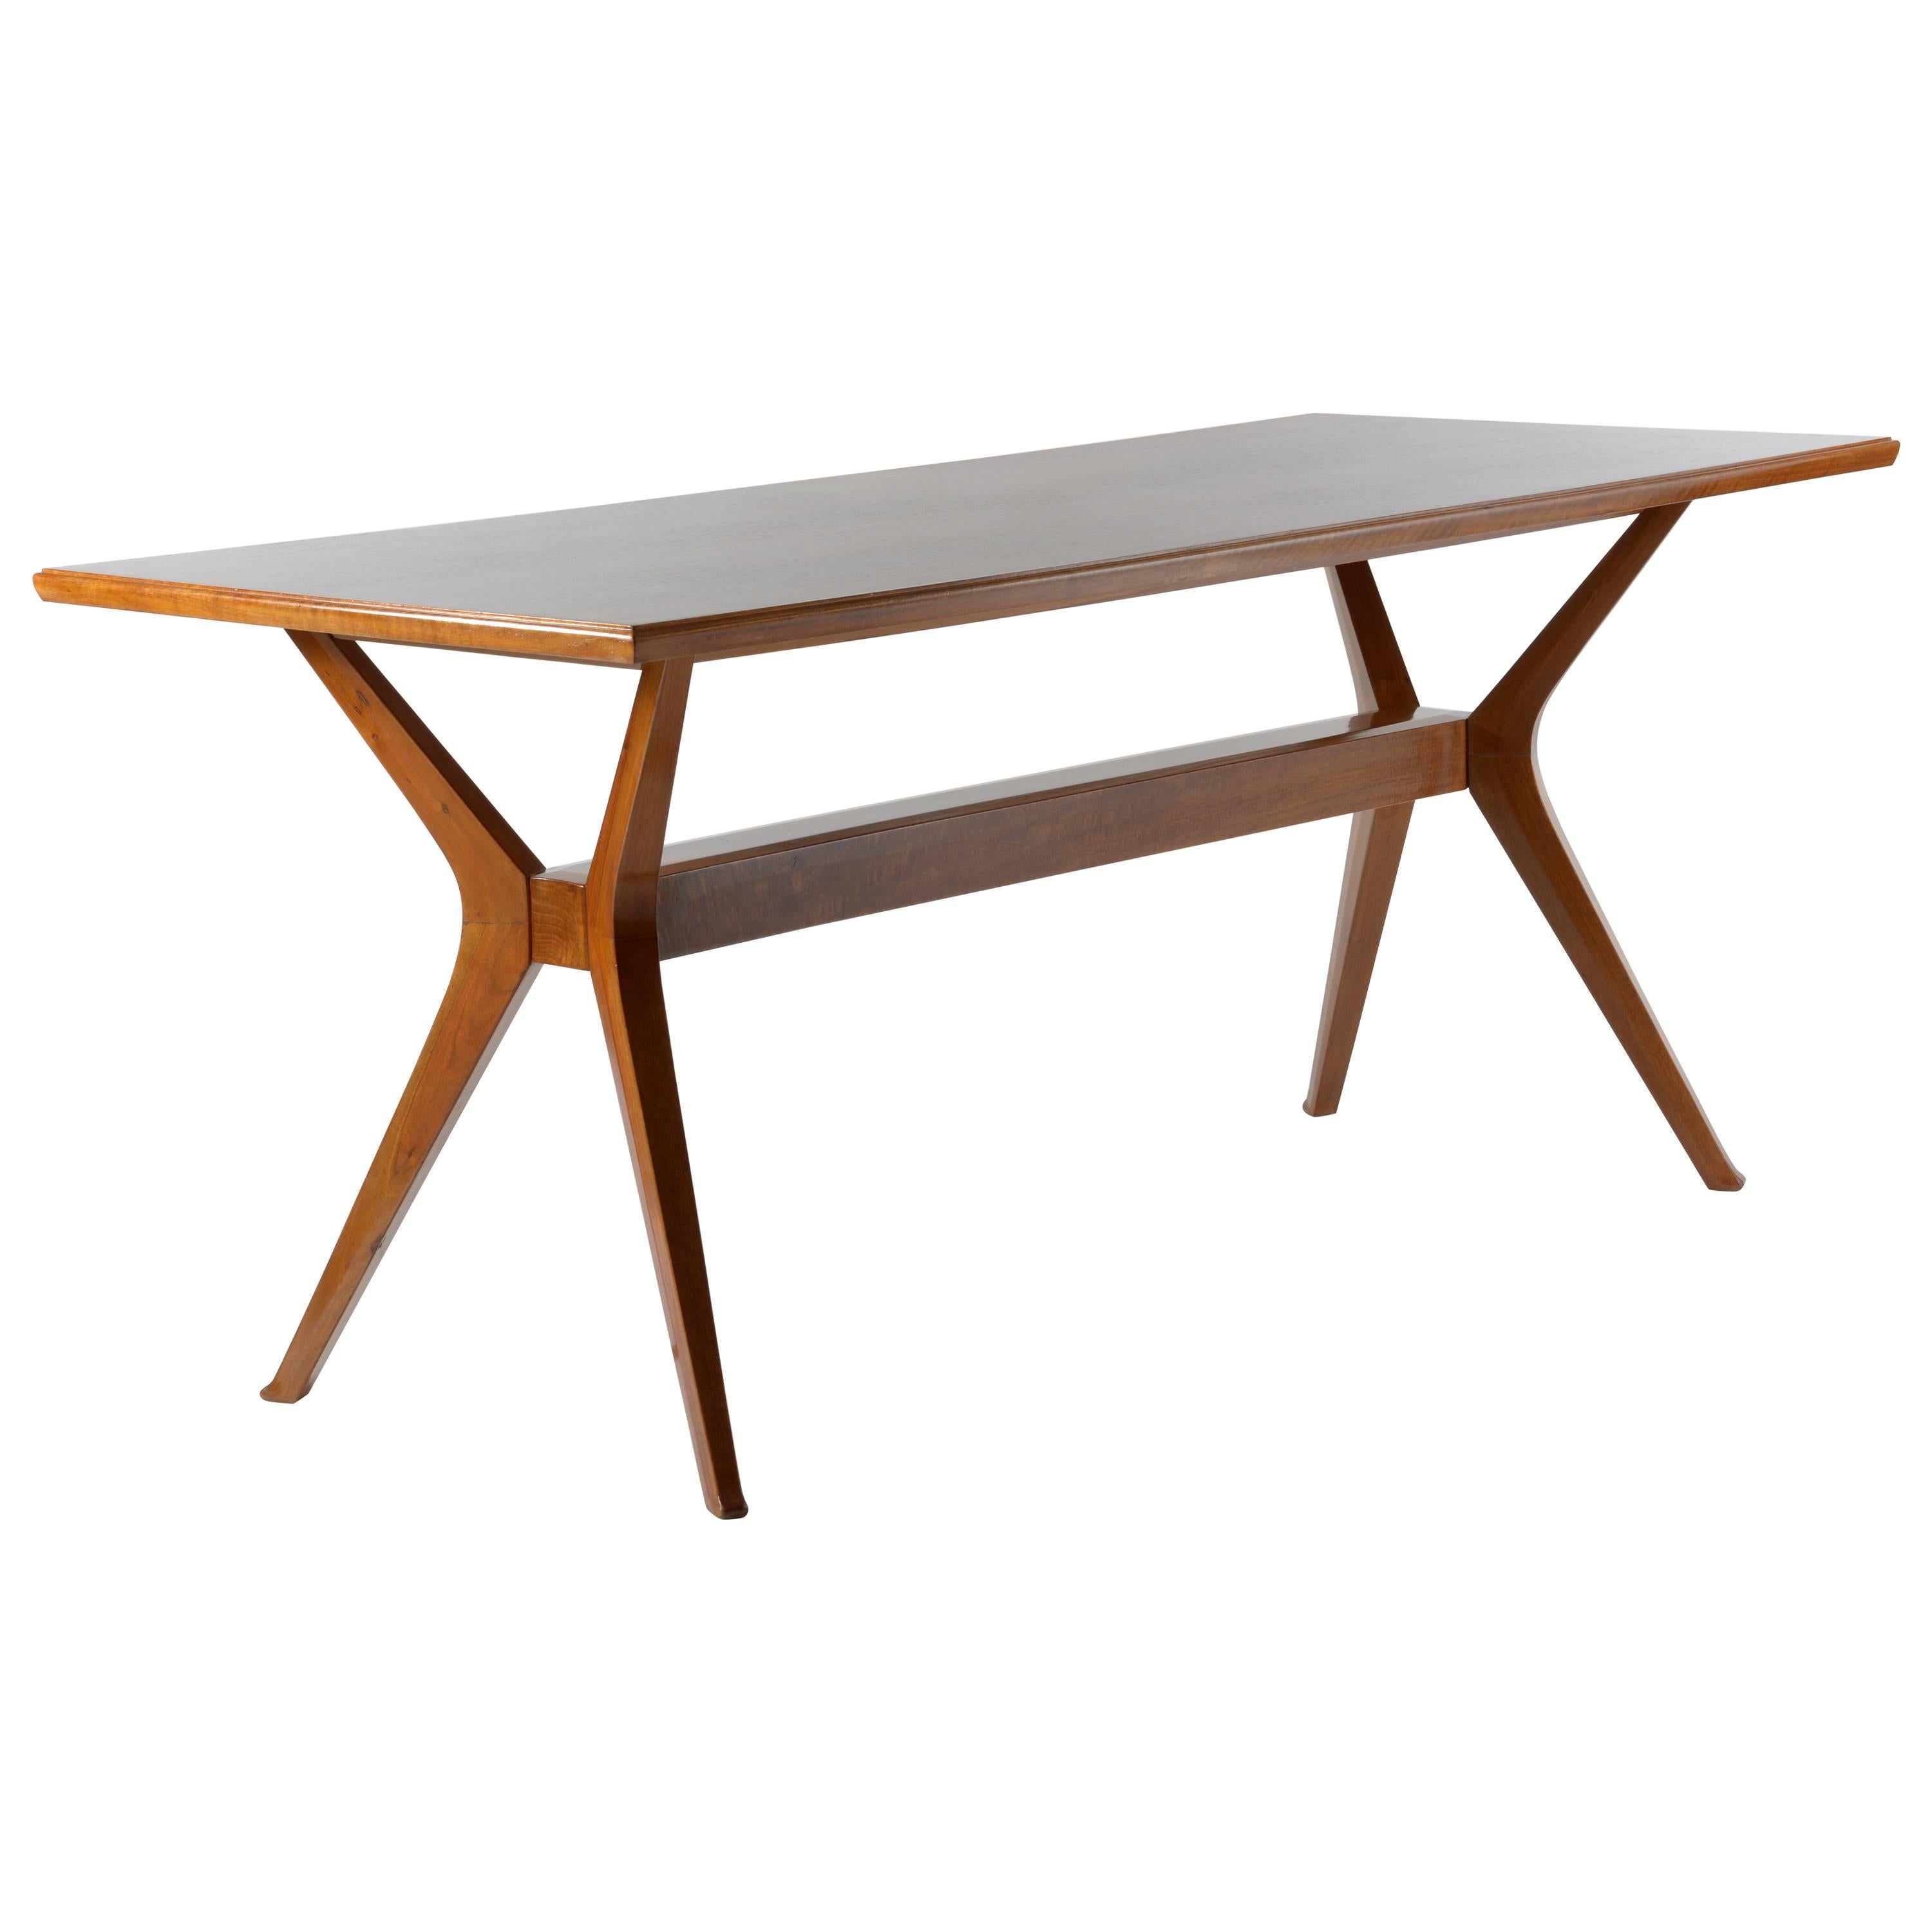 Slender Italian Solid Walnut Dining Table or Consolle by Arch Italo Gamberini